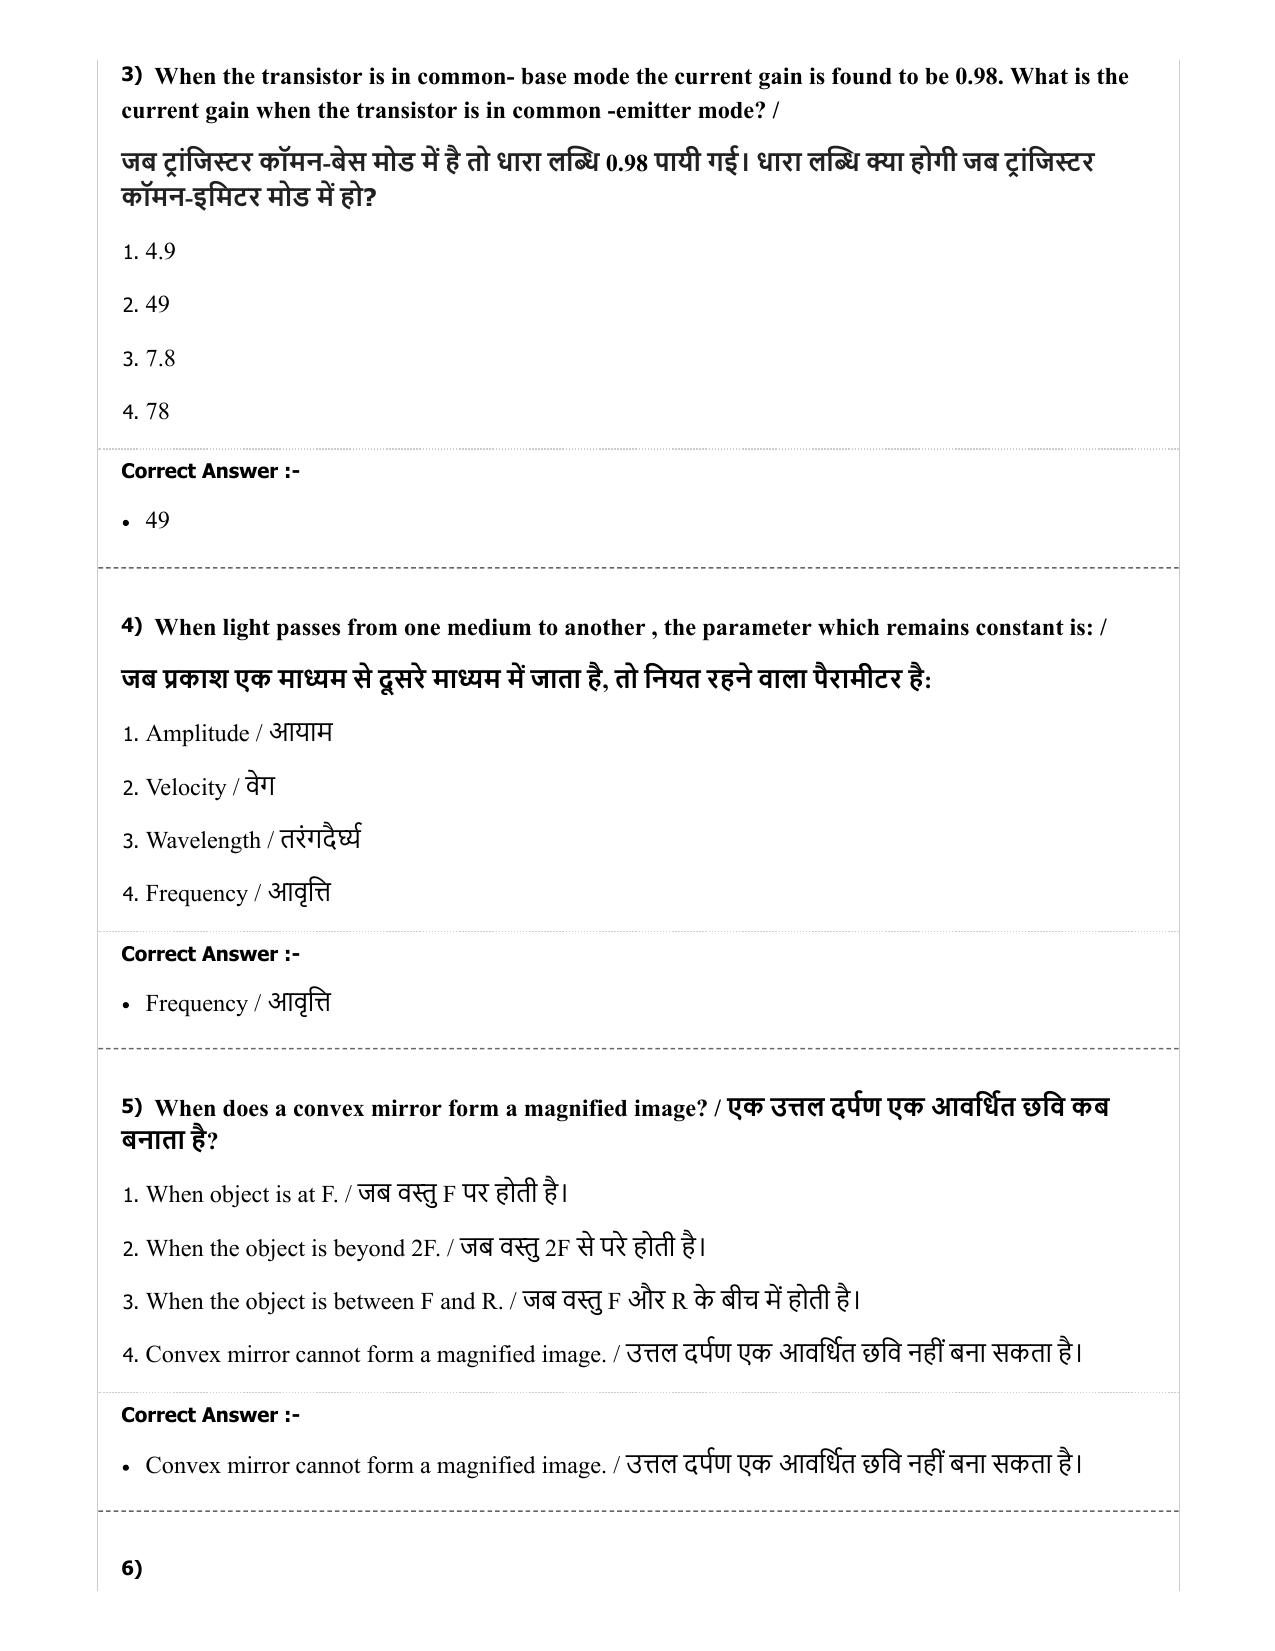 MP PAT (Exam. Date 29/06/2019 Time 2:00 PM) - PCA Question Paper - Page 2